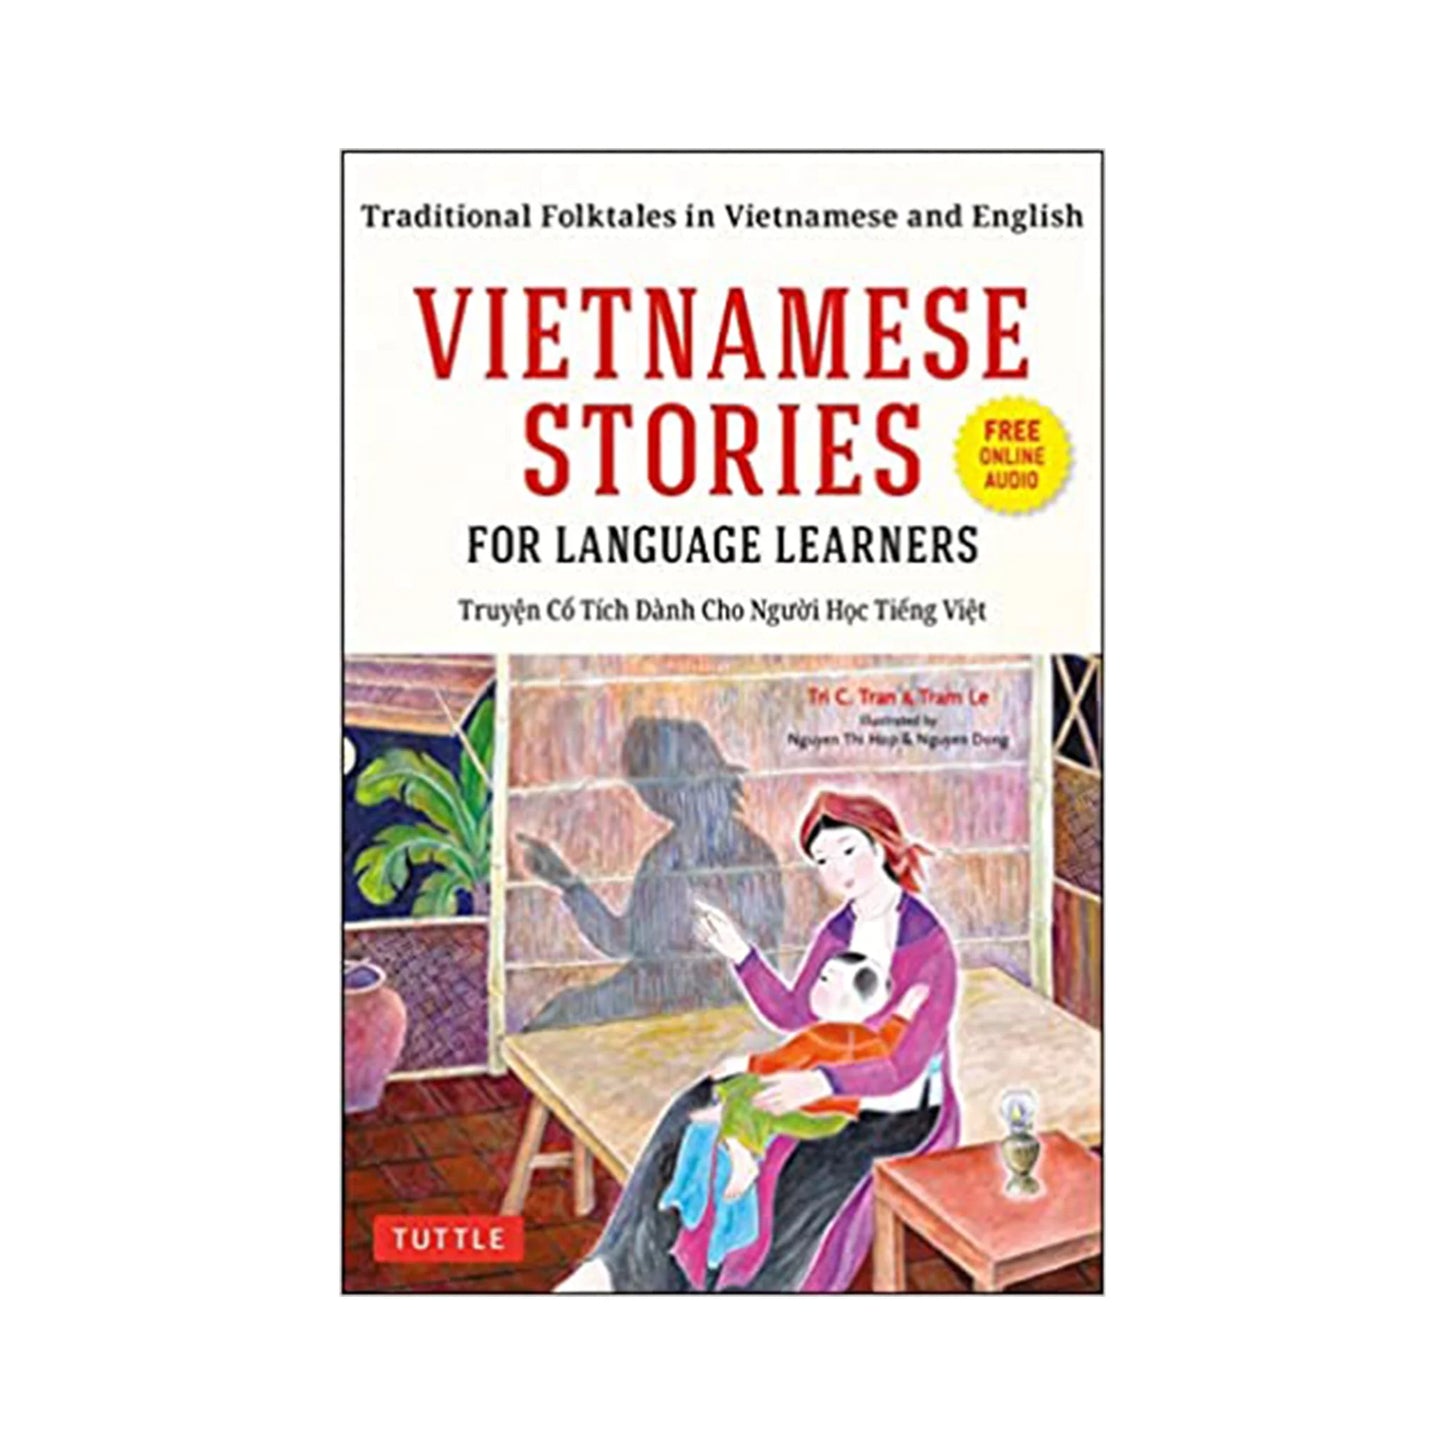 Vietnamese Stories for Language Learners - A Bilingual Paperback Book